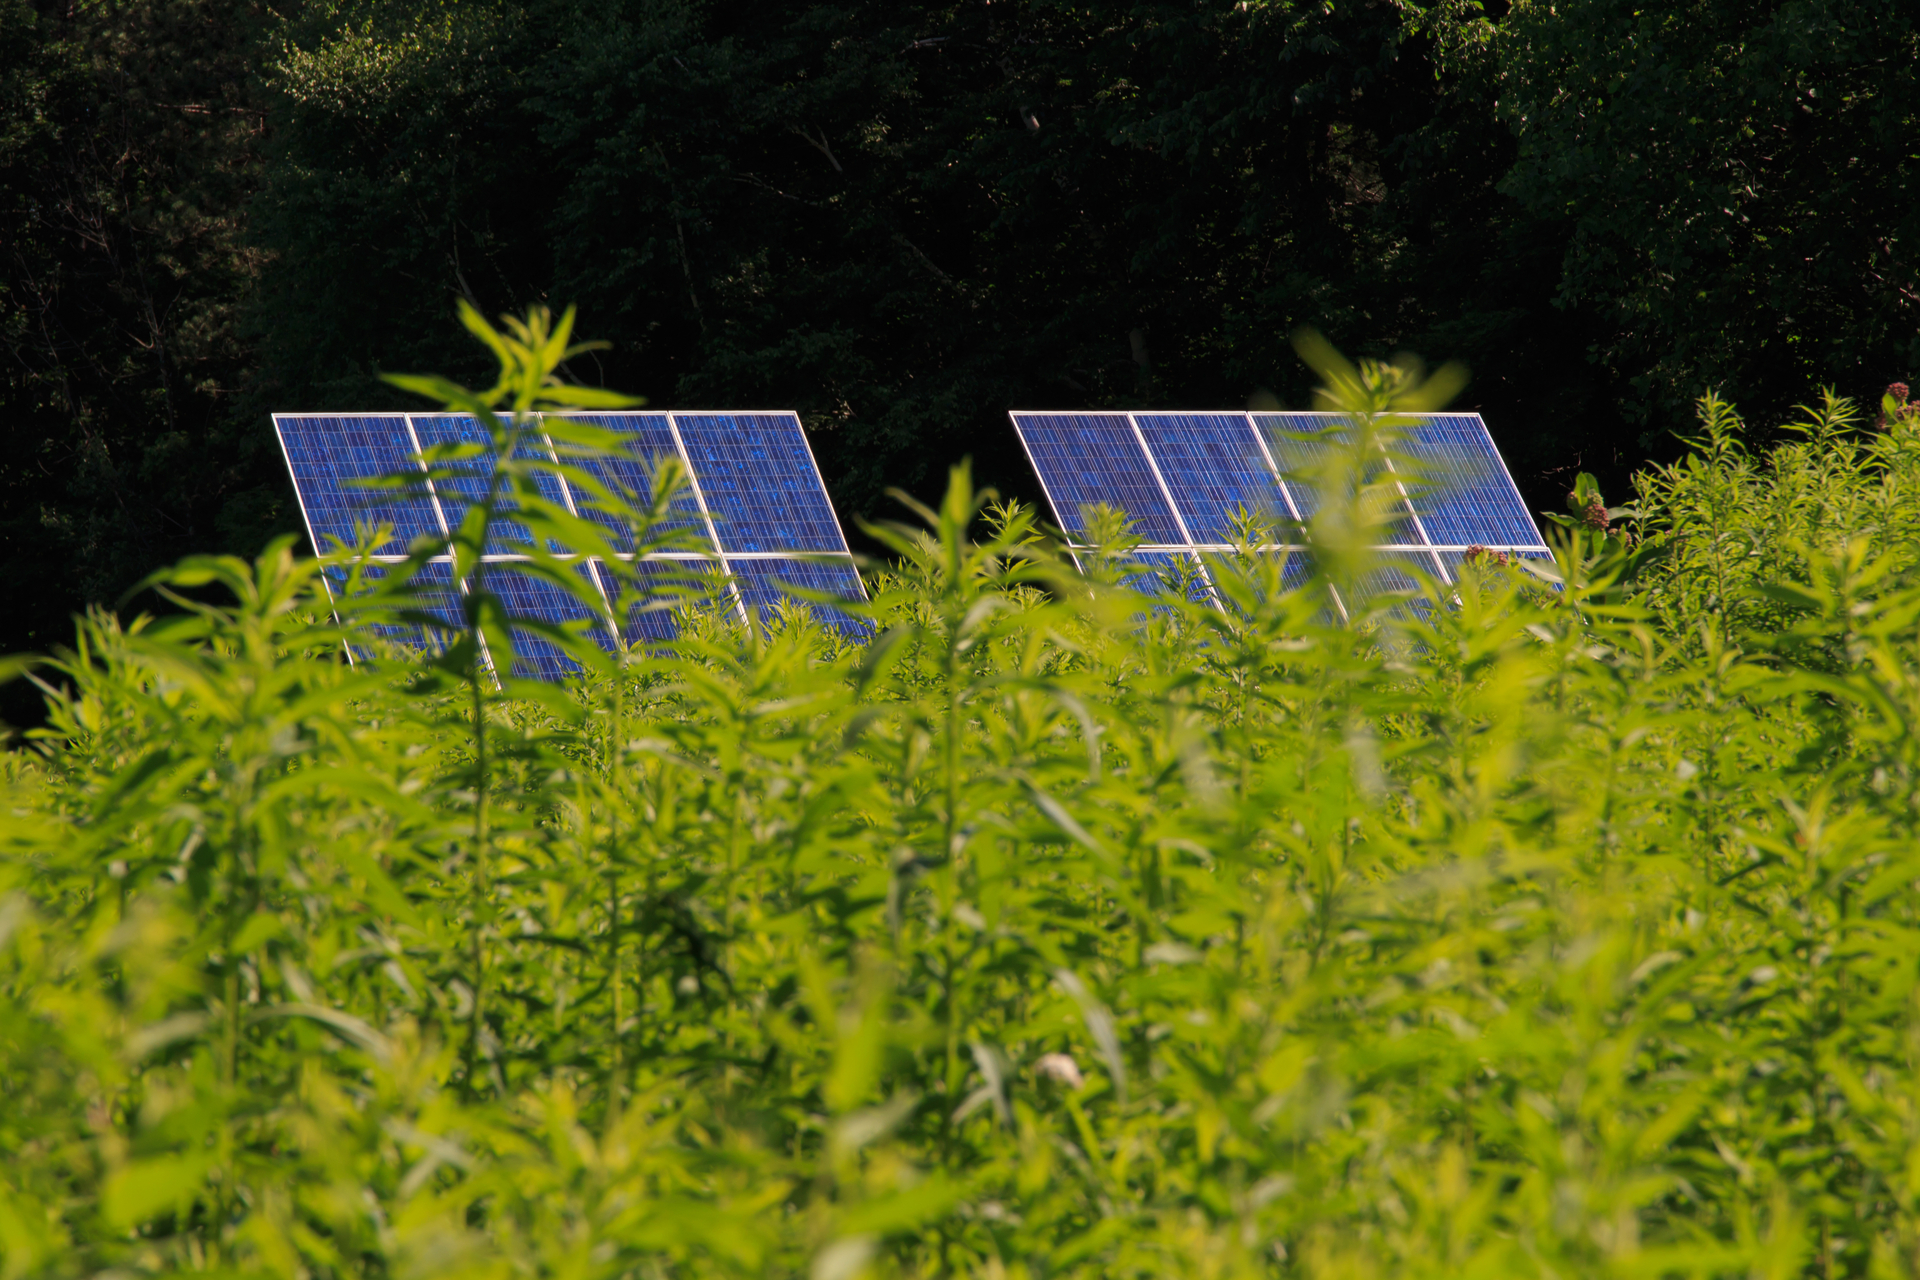 Two solar panel arrays behind a field of shrubs